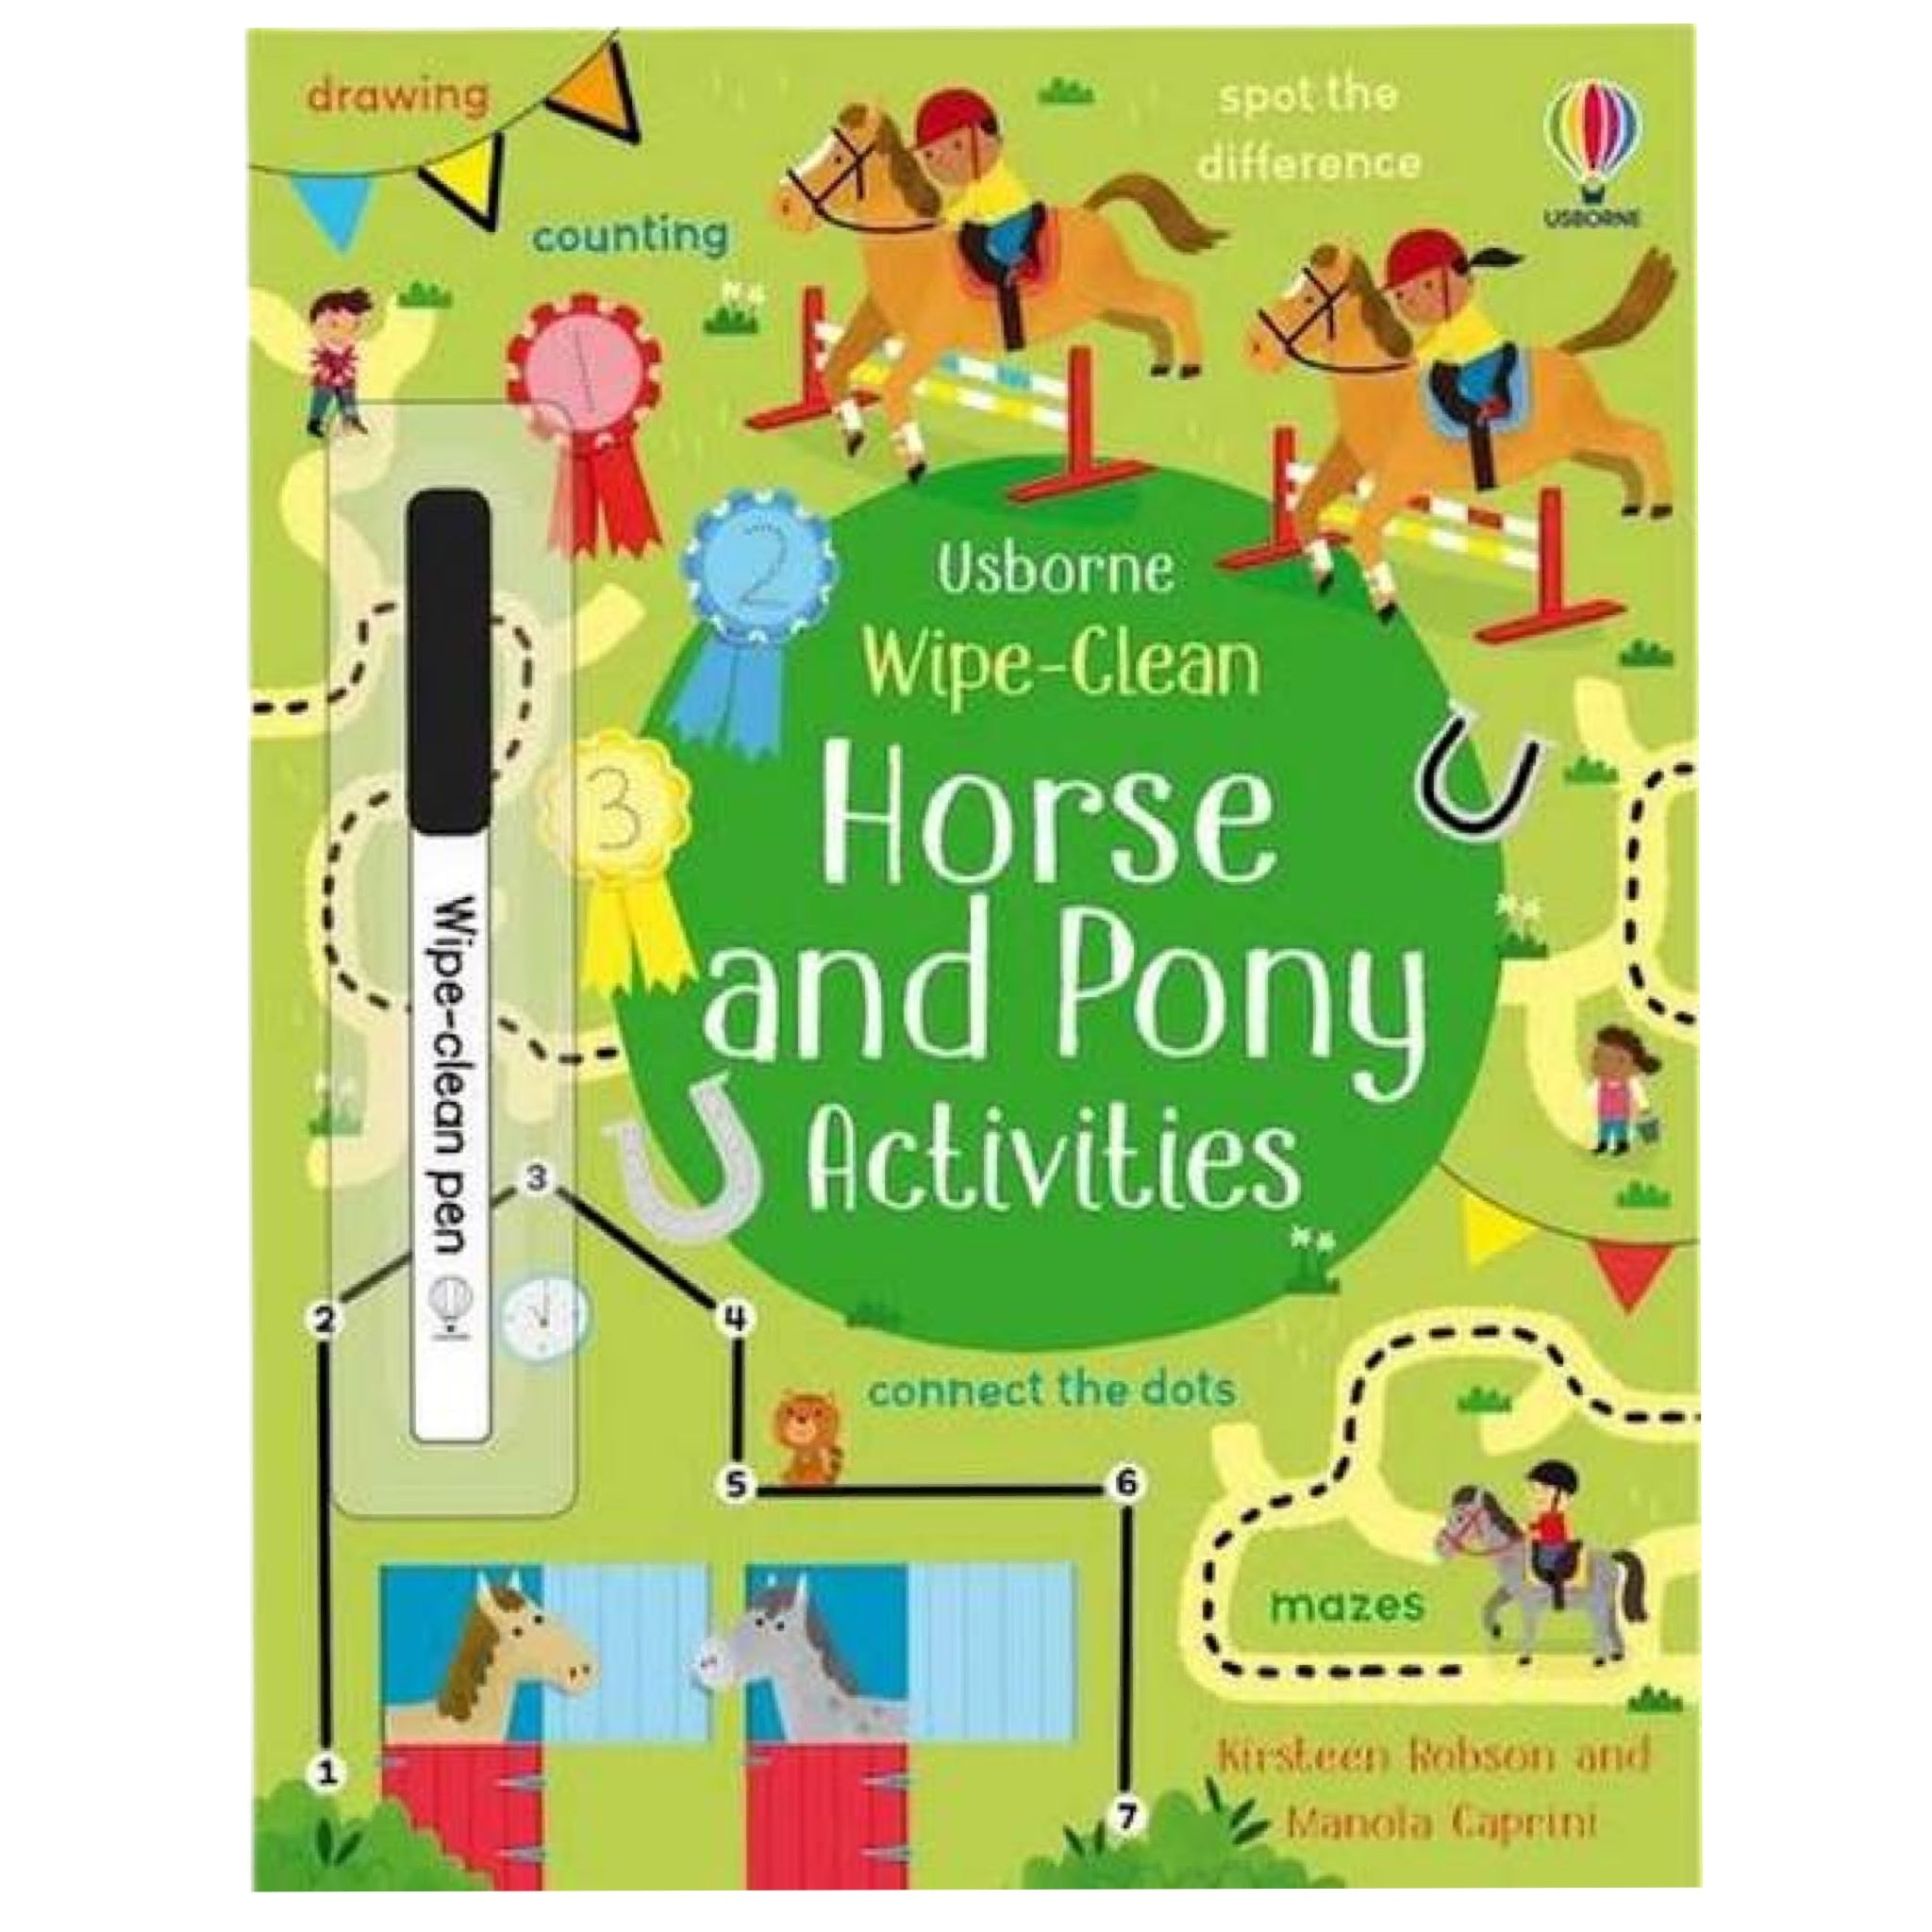 Wipe-Clean, Horse and Pony Activities